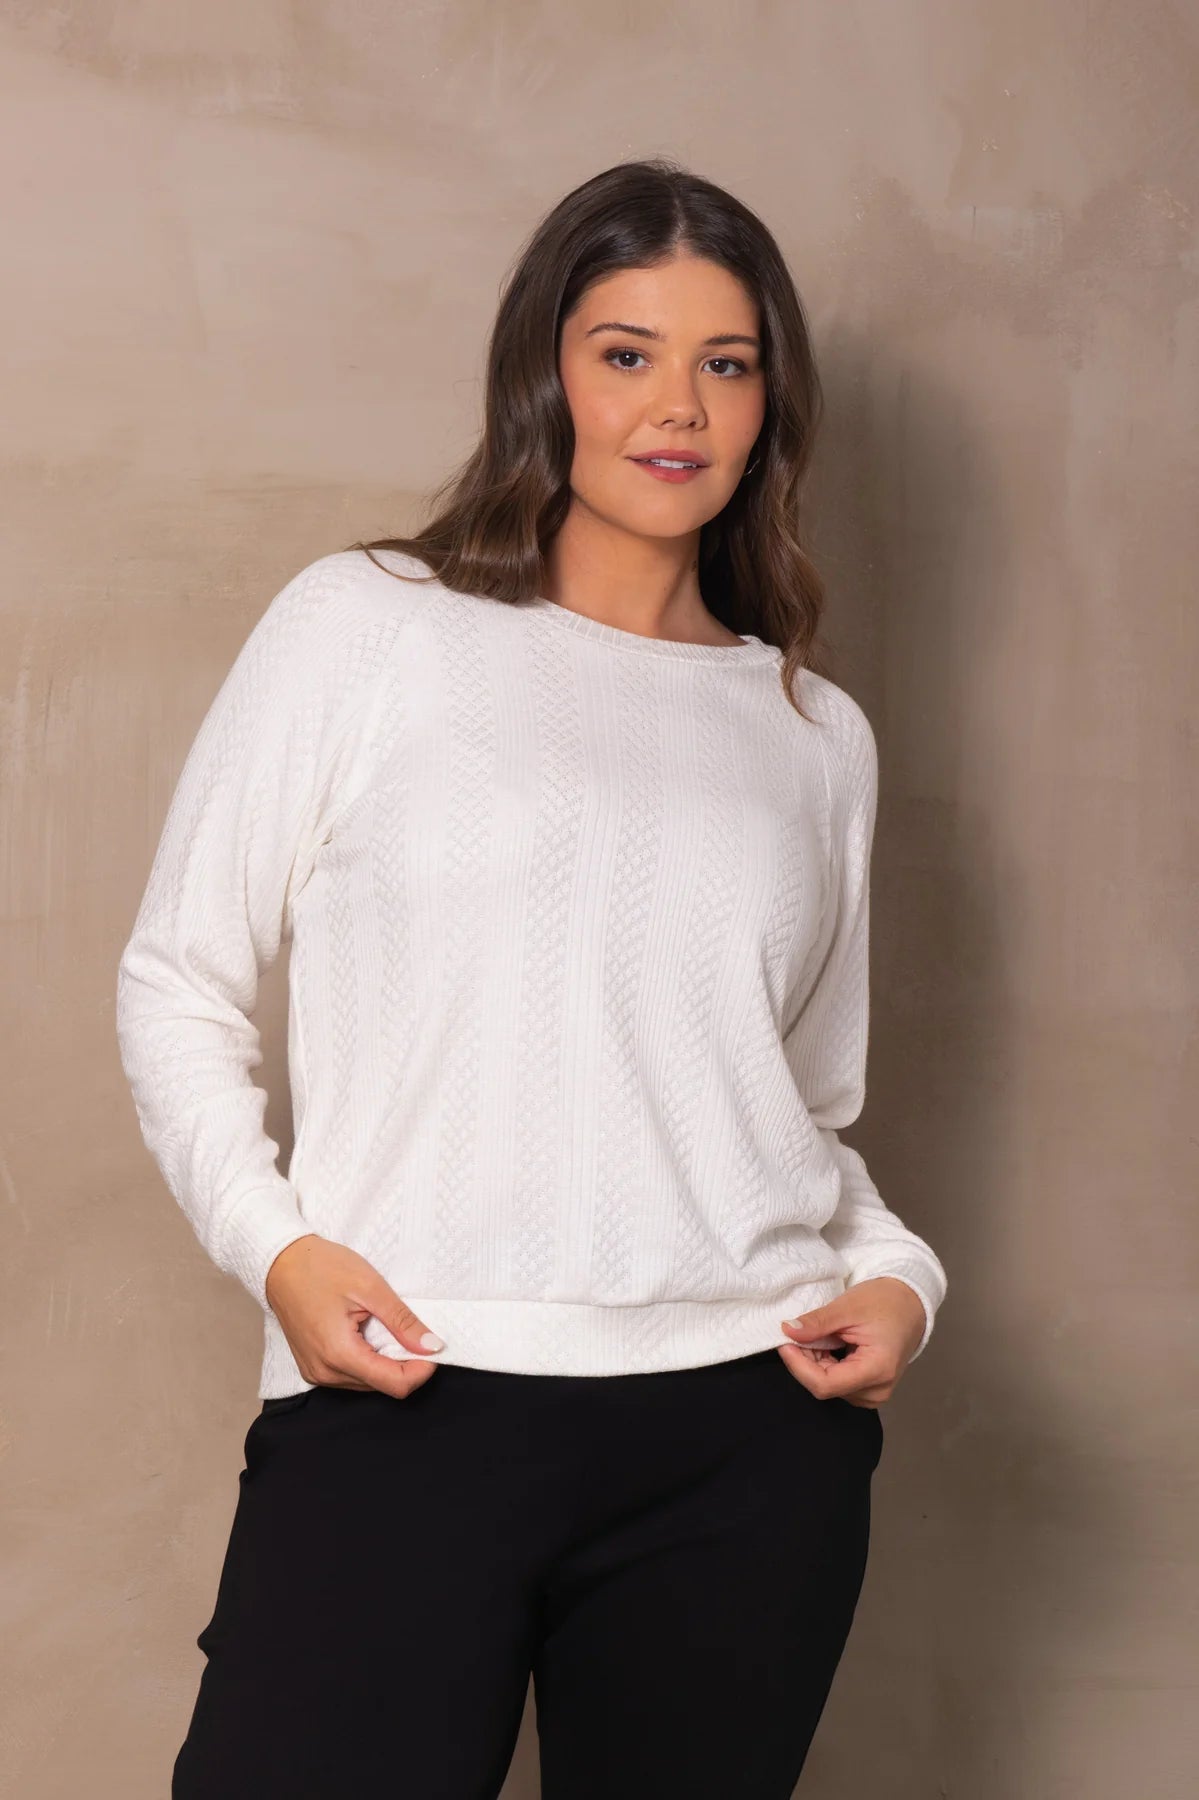 Rhea Sweater by Cokluch, Ivory, textured knit, raglan sleeves, round neck, band at hem, bamboo rayon blend, sizes XS to 3XL, made in Quebec